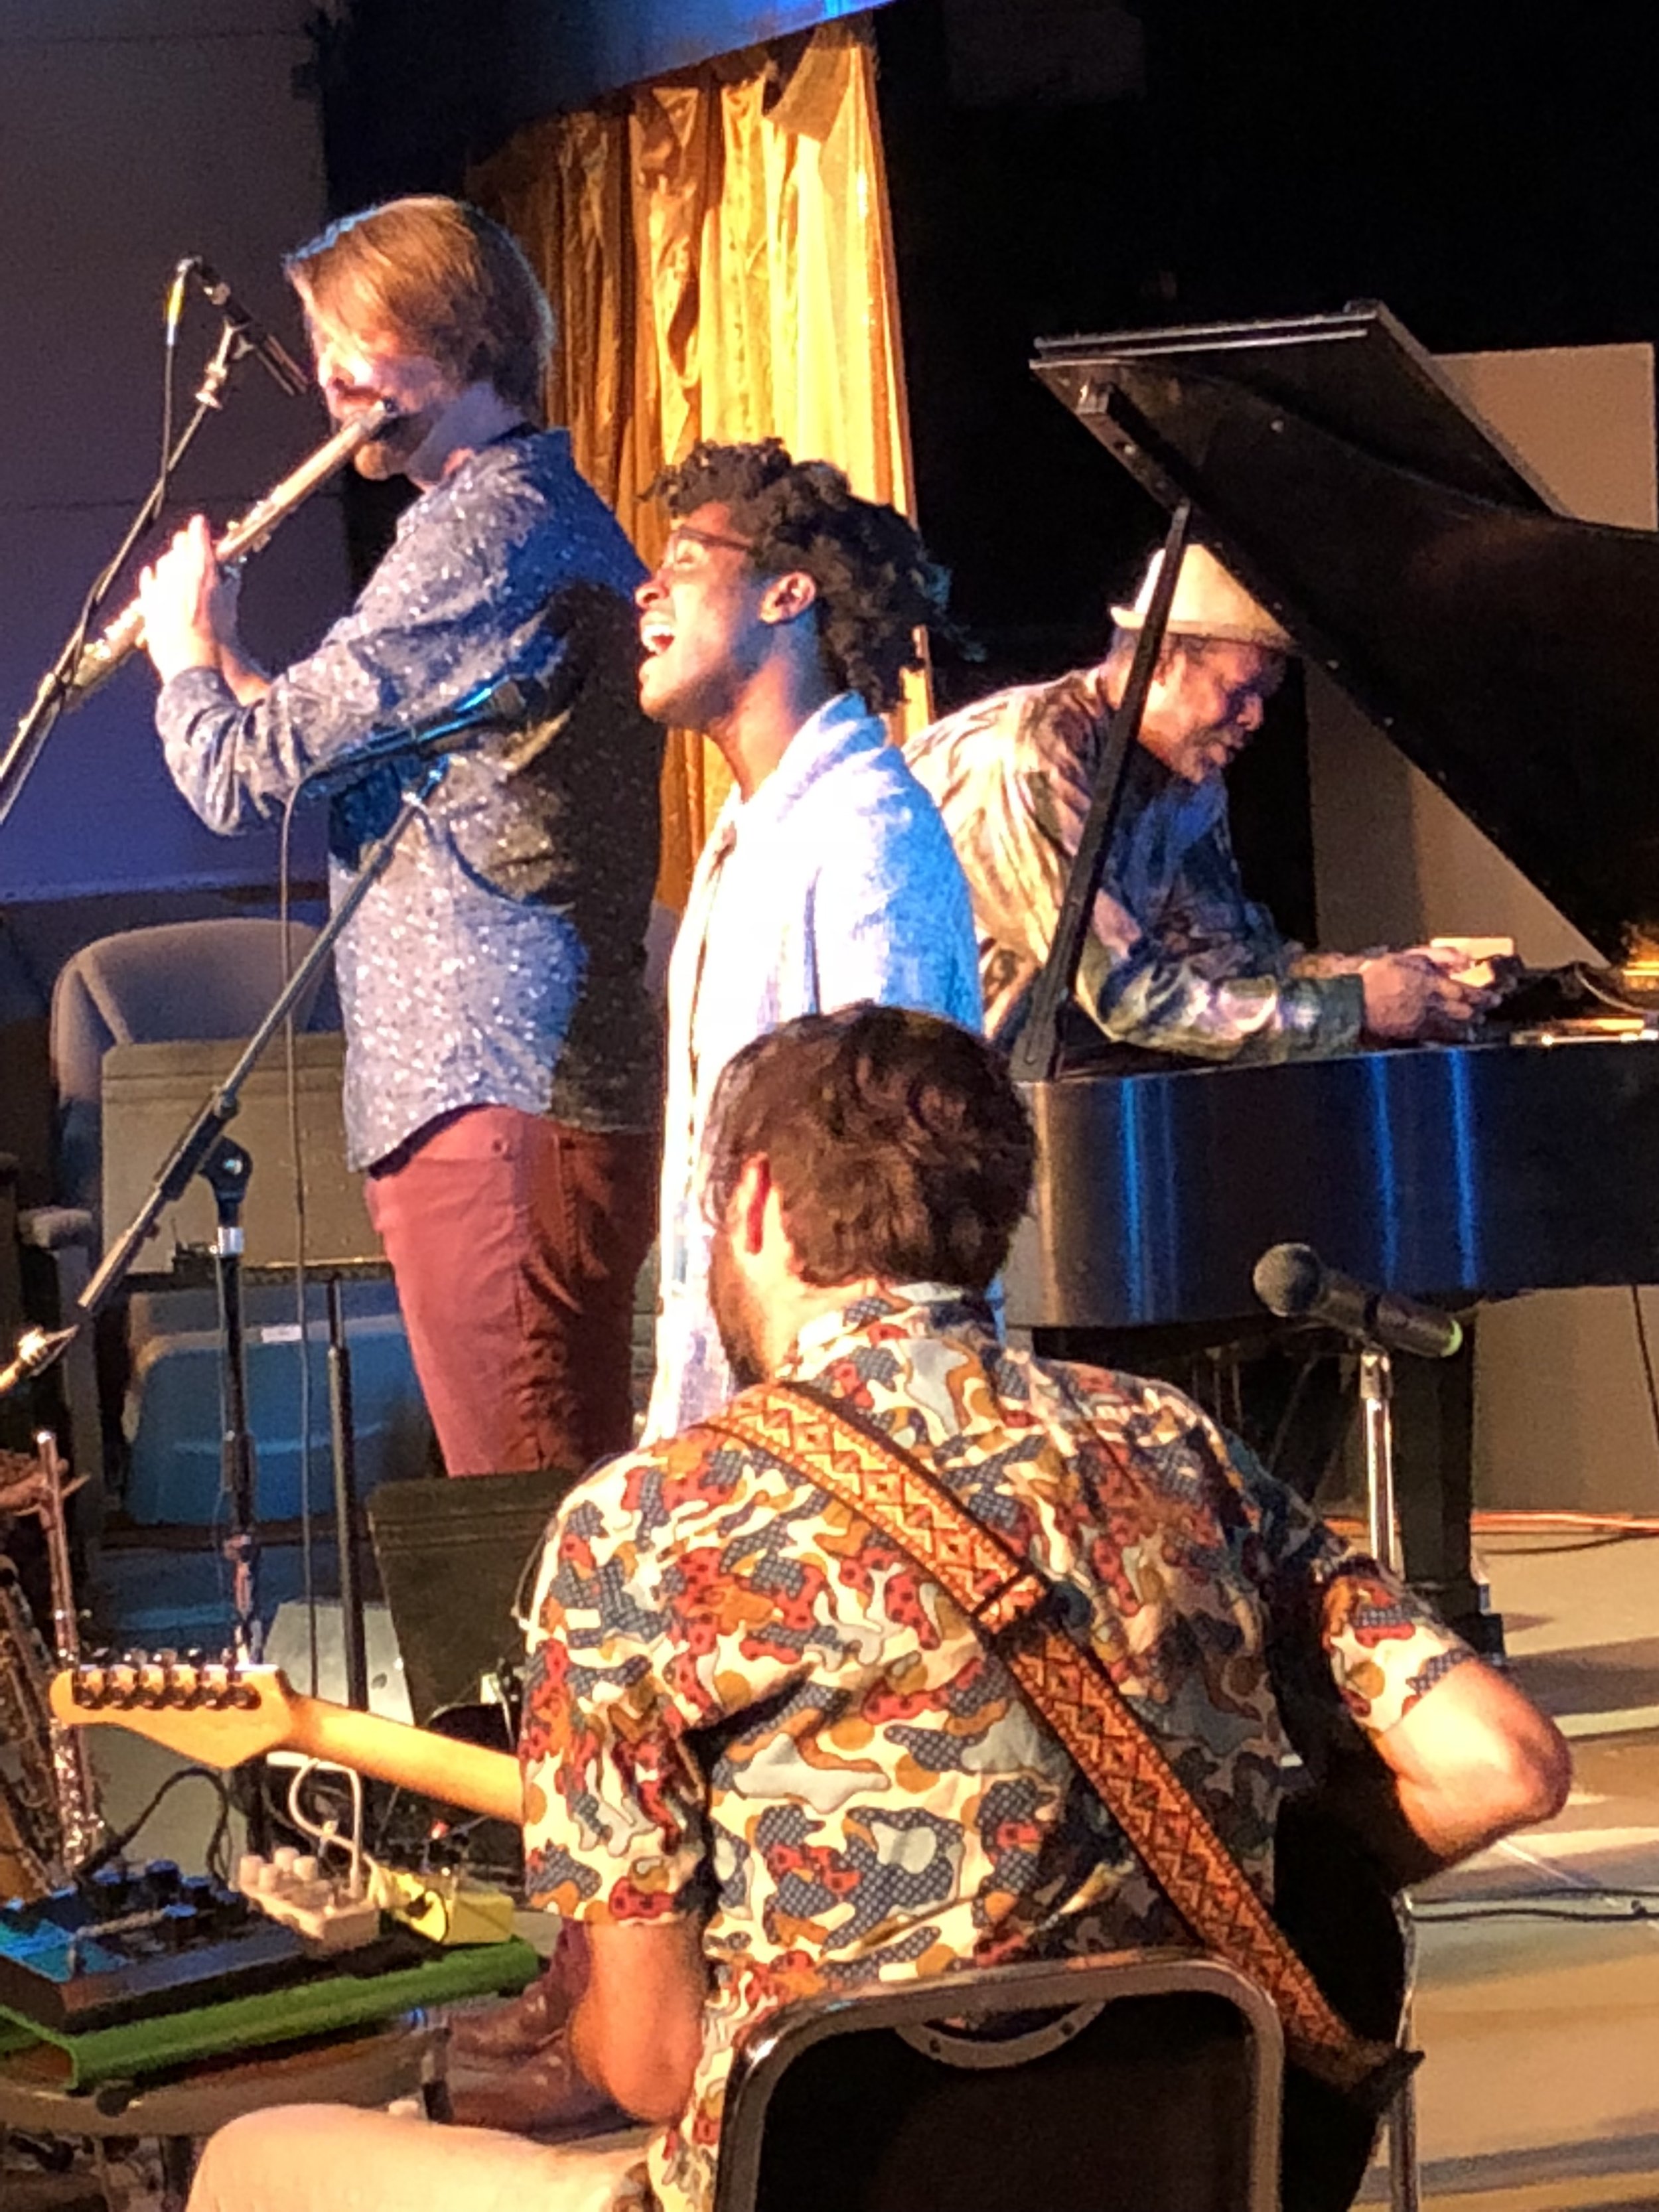 John C. Savage-flute, David Ornette Cherry-piano, Jimmie Herrod-vocals, and Mike Gamble-guitar (Andrew Jones-bass and Chris Johnedis-drums not pictured) at the Montavilla Jazz Fesitval, Portland, OR